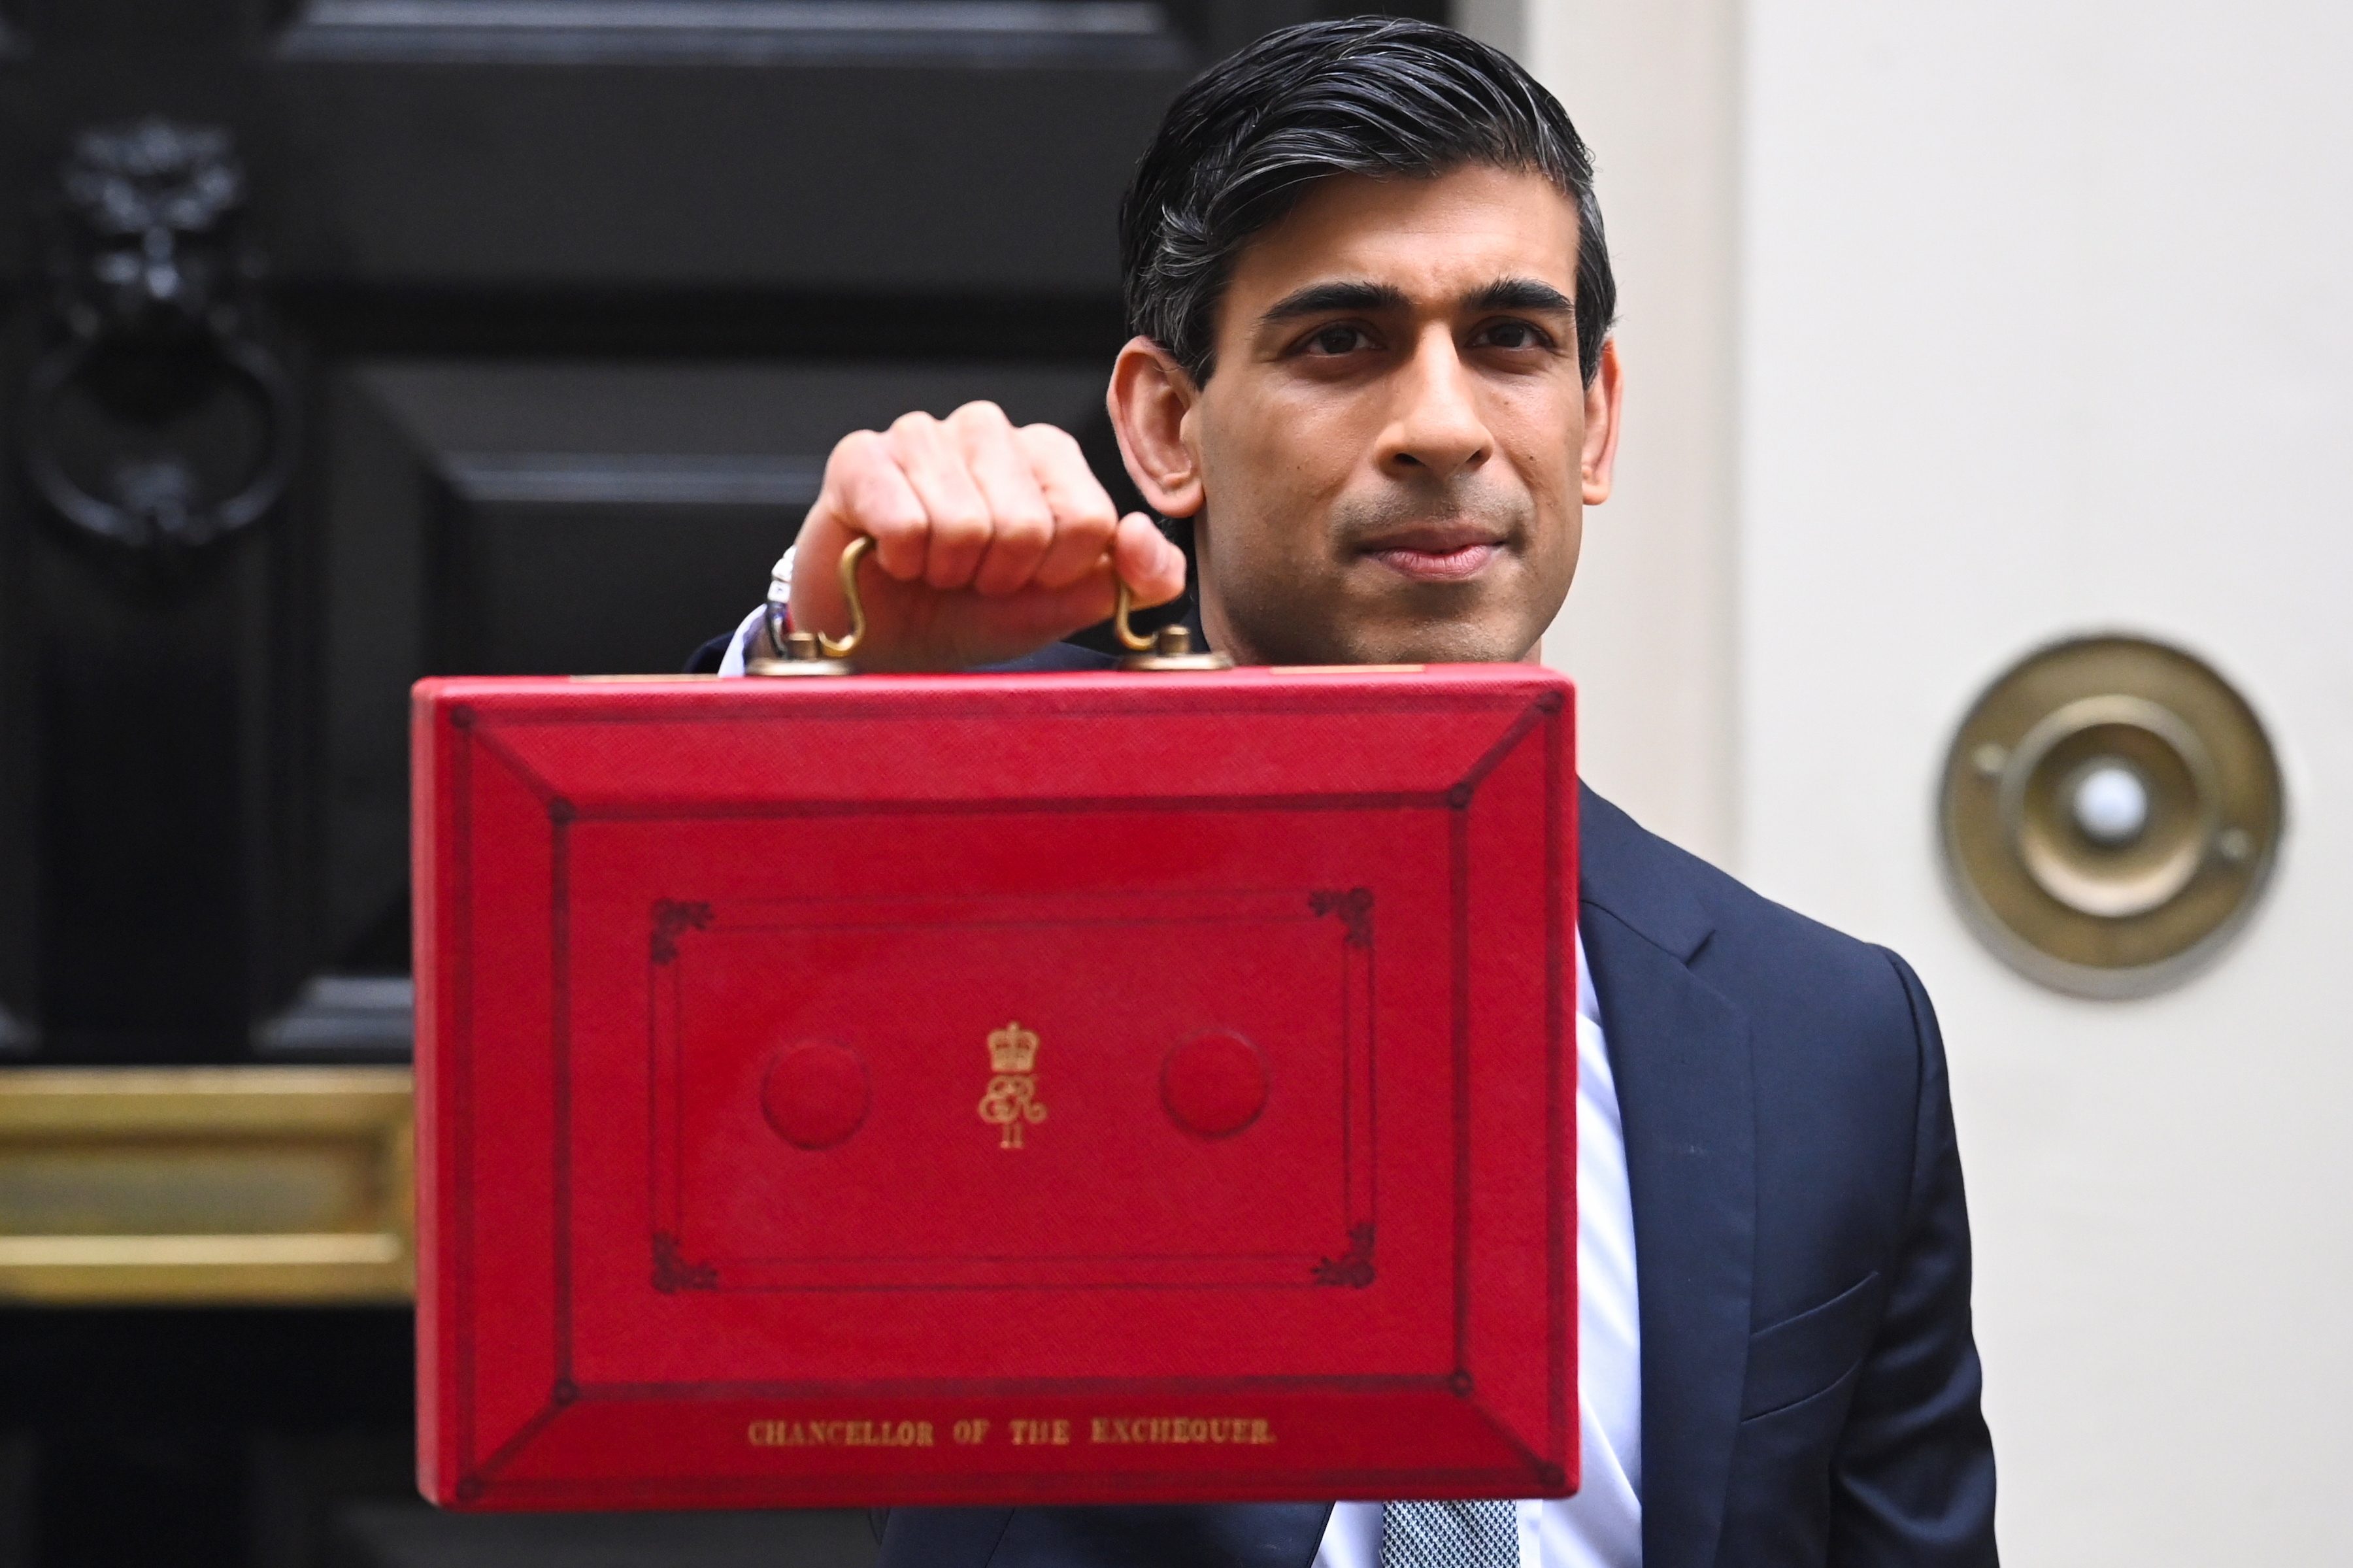 Sunak gives UK economy a new boost to see out COVID-19 crisis, tax rises ahead